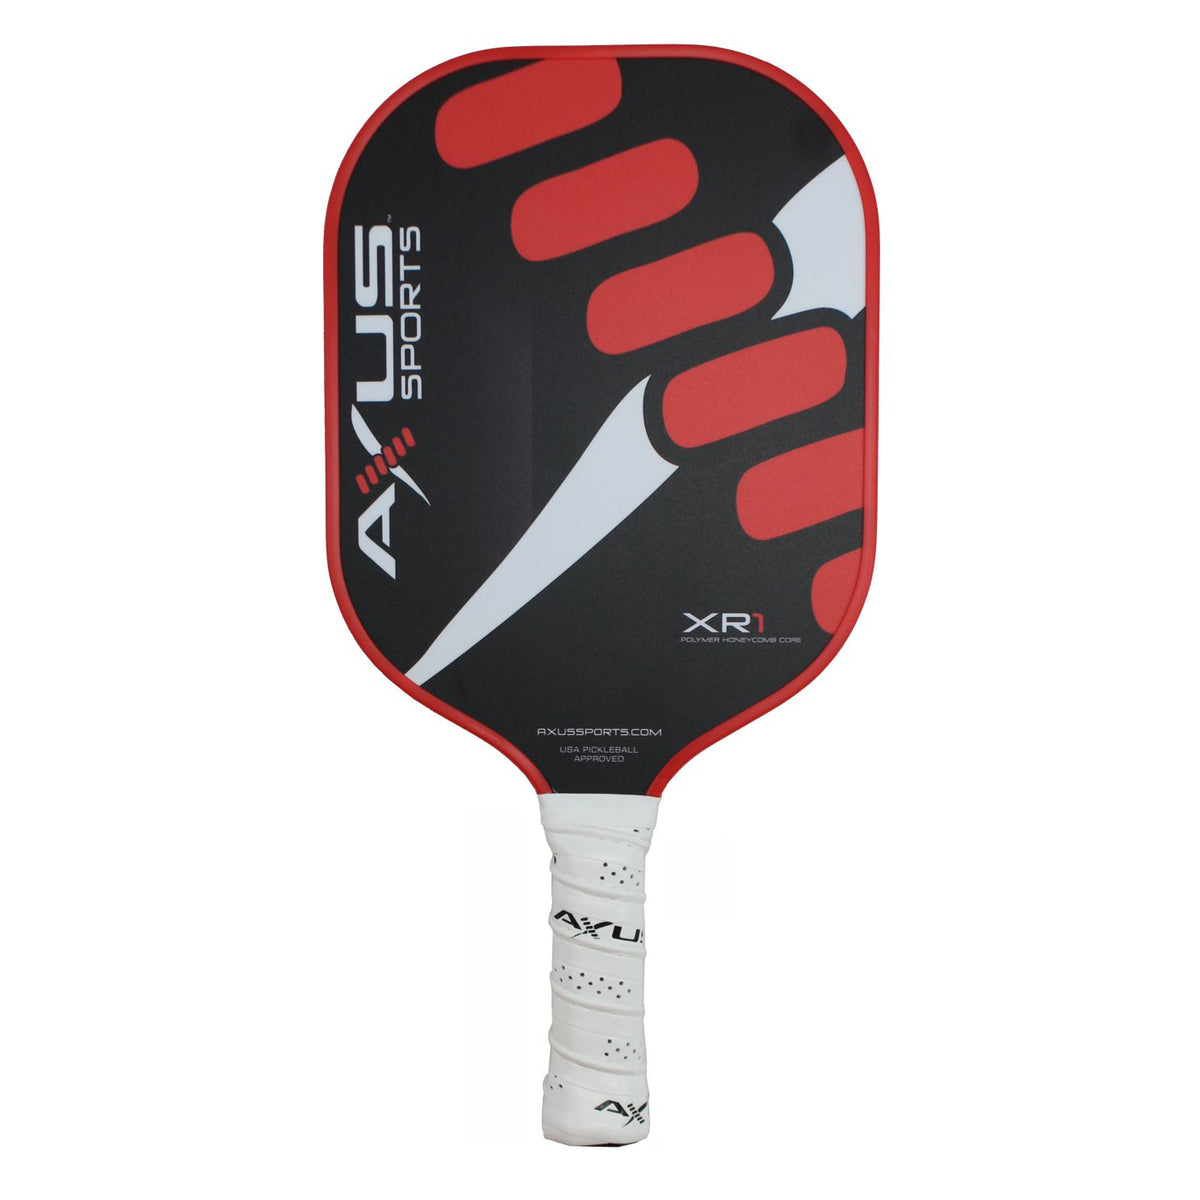 ProLite Axus XR1 Pickleball Paddle – Birdies and Bows